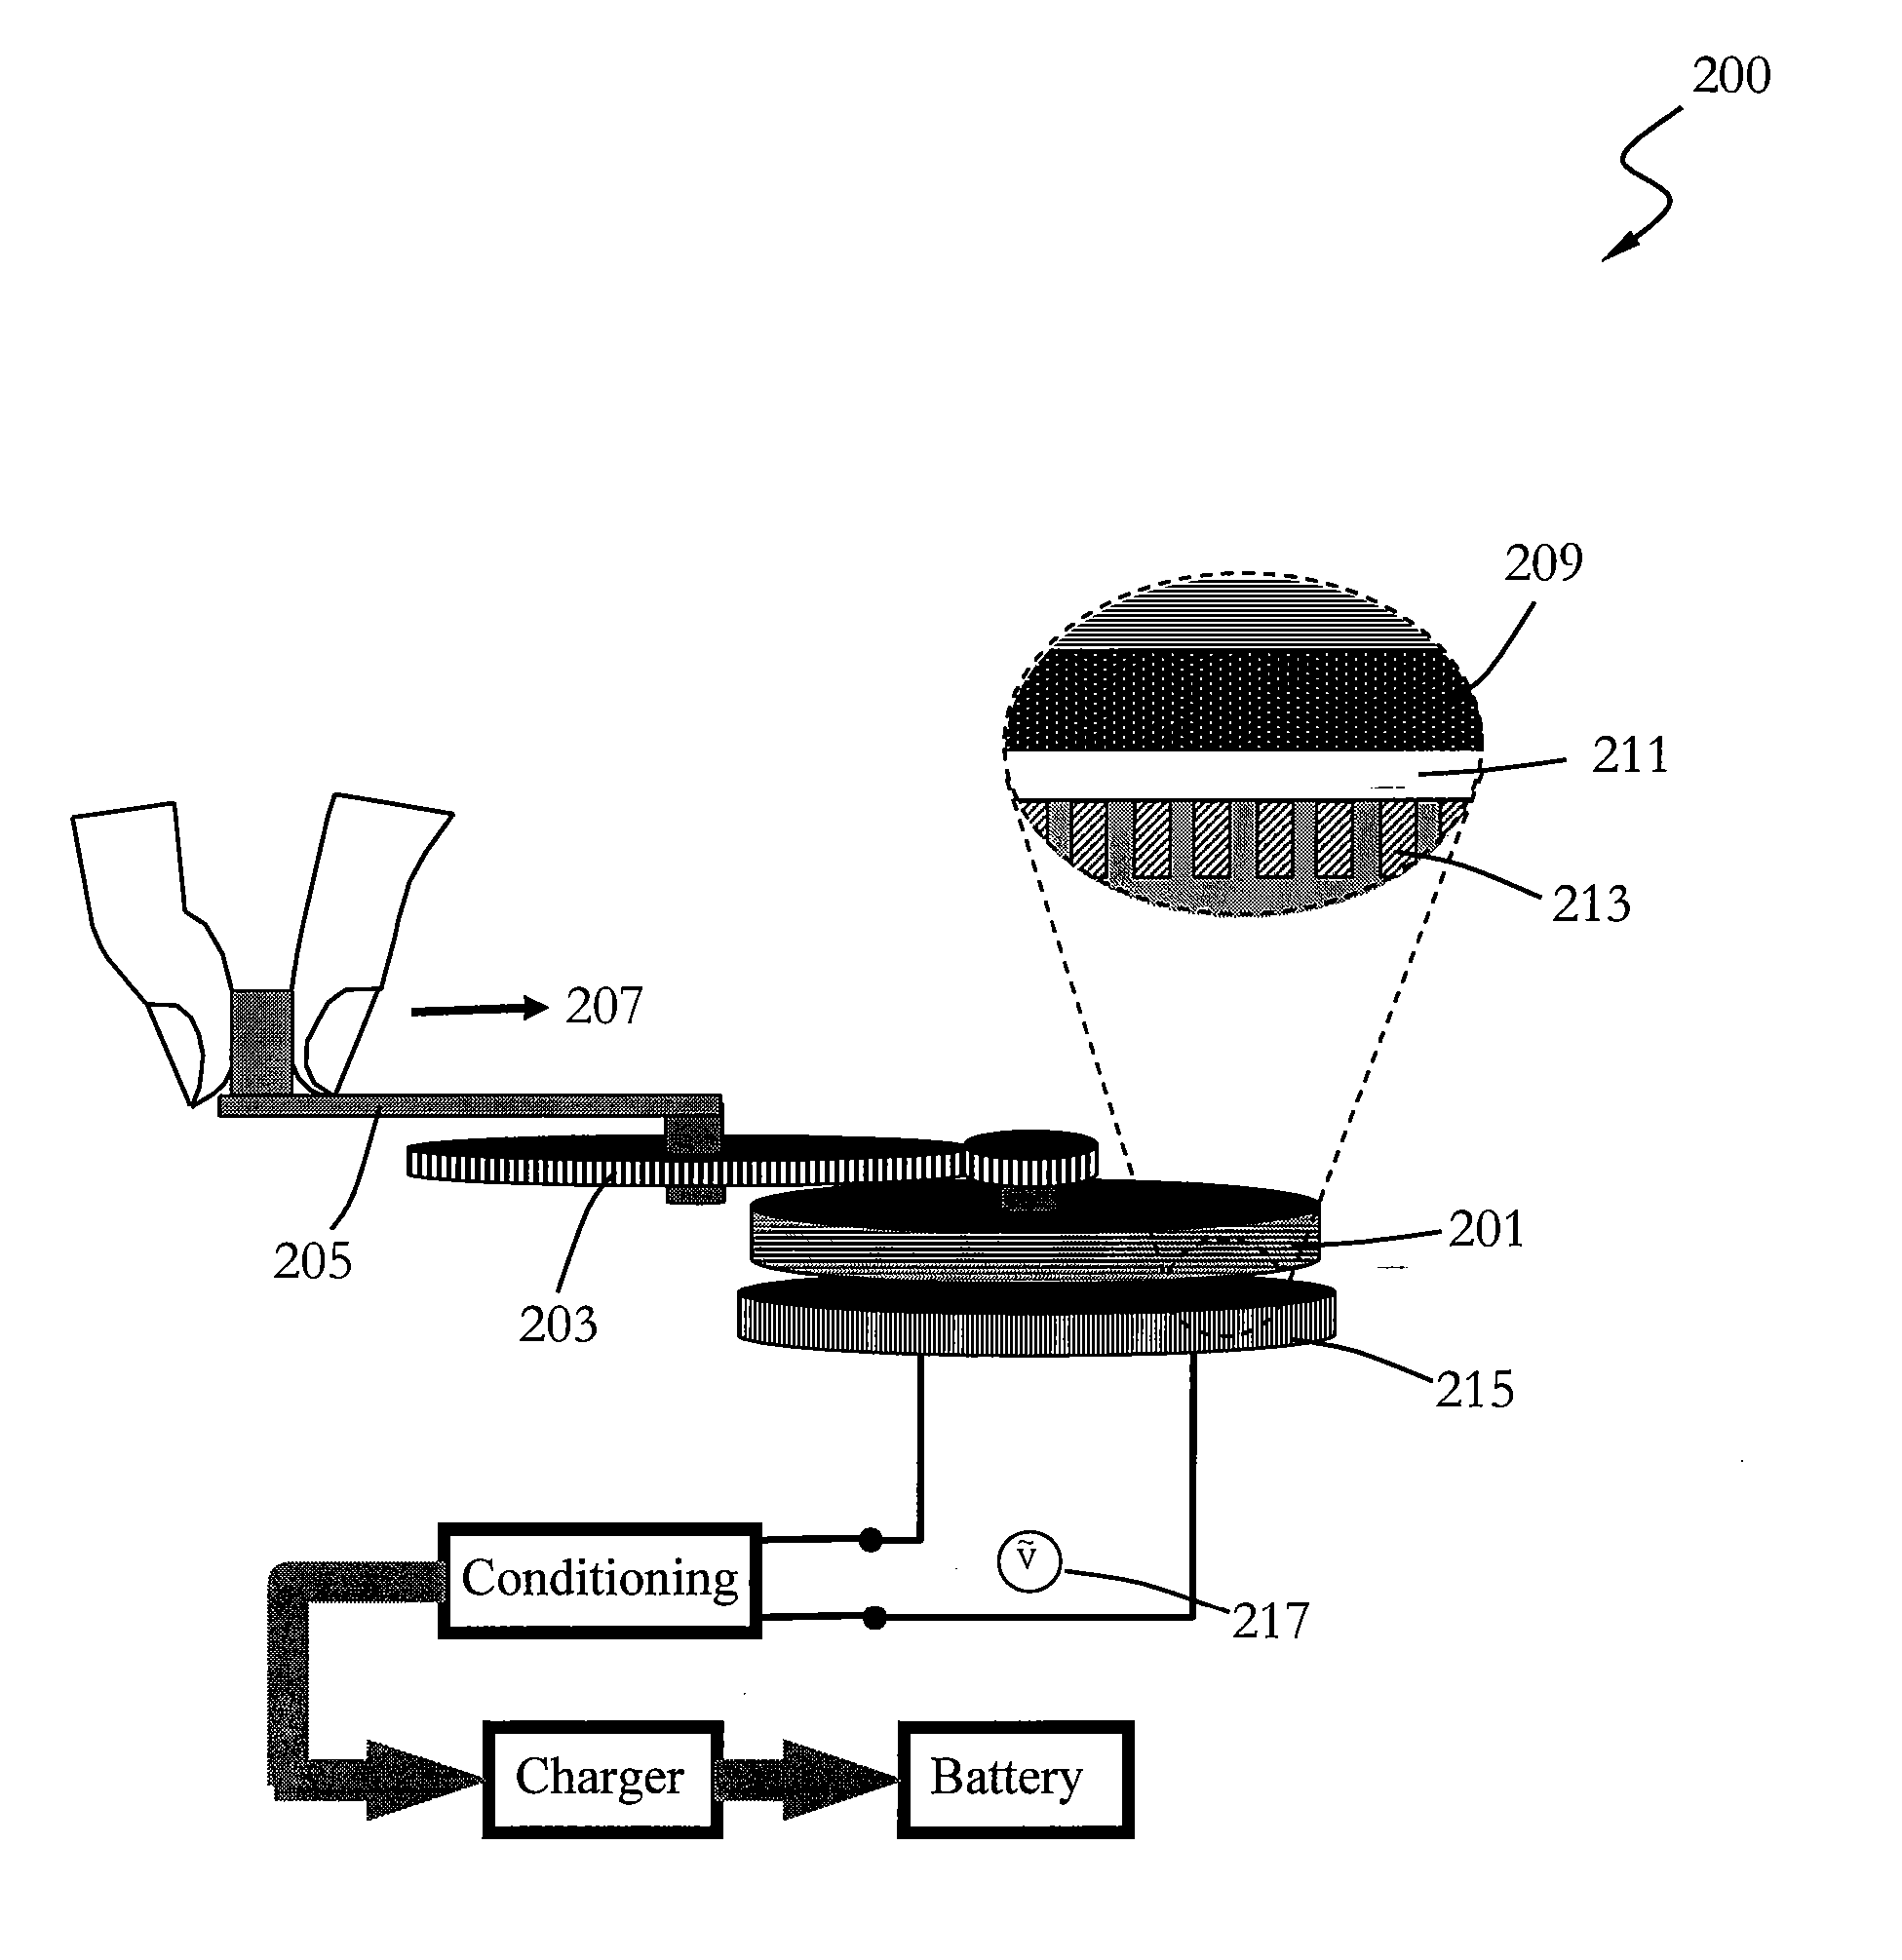 Method and Structure for Kinetic Energy Based Generator for Portable Electronic Devices